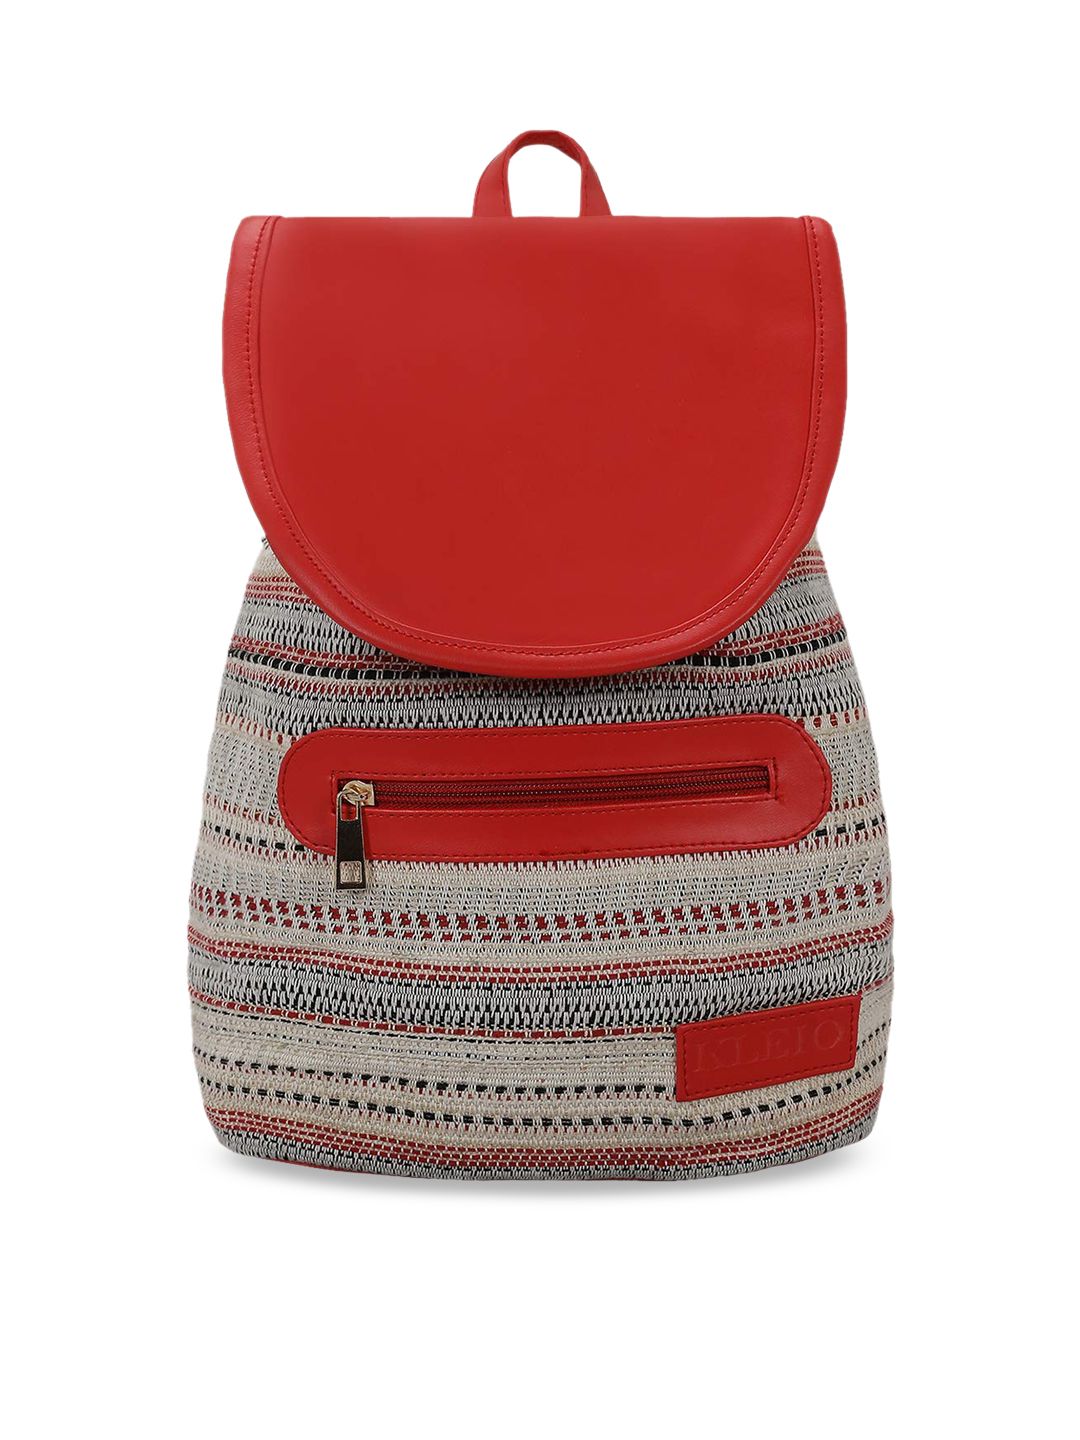 KLEIO Women Red & Beige Woven Design Backpack Price in India